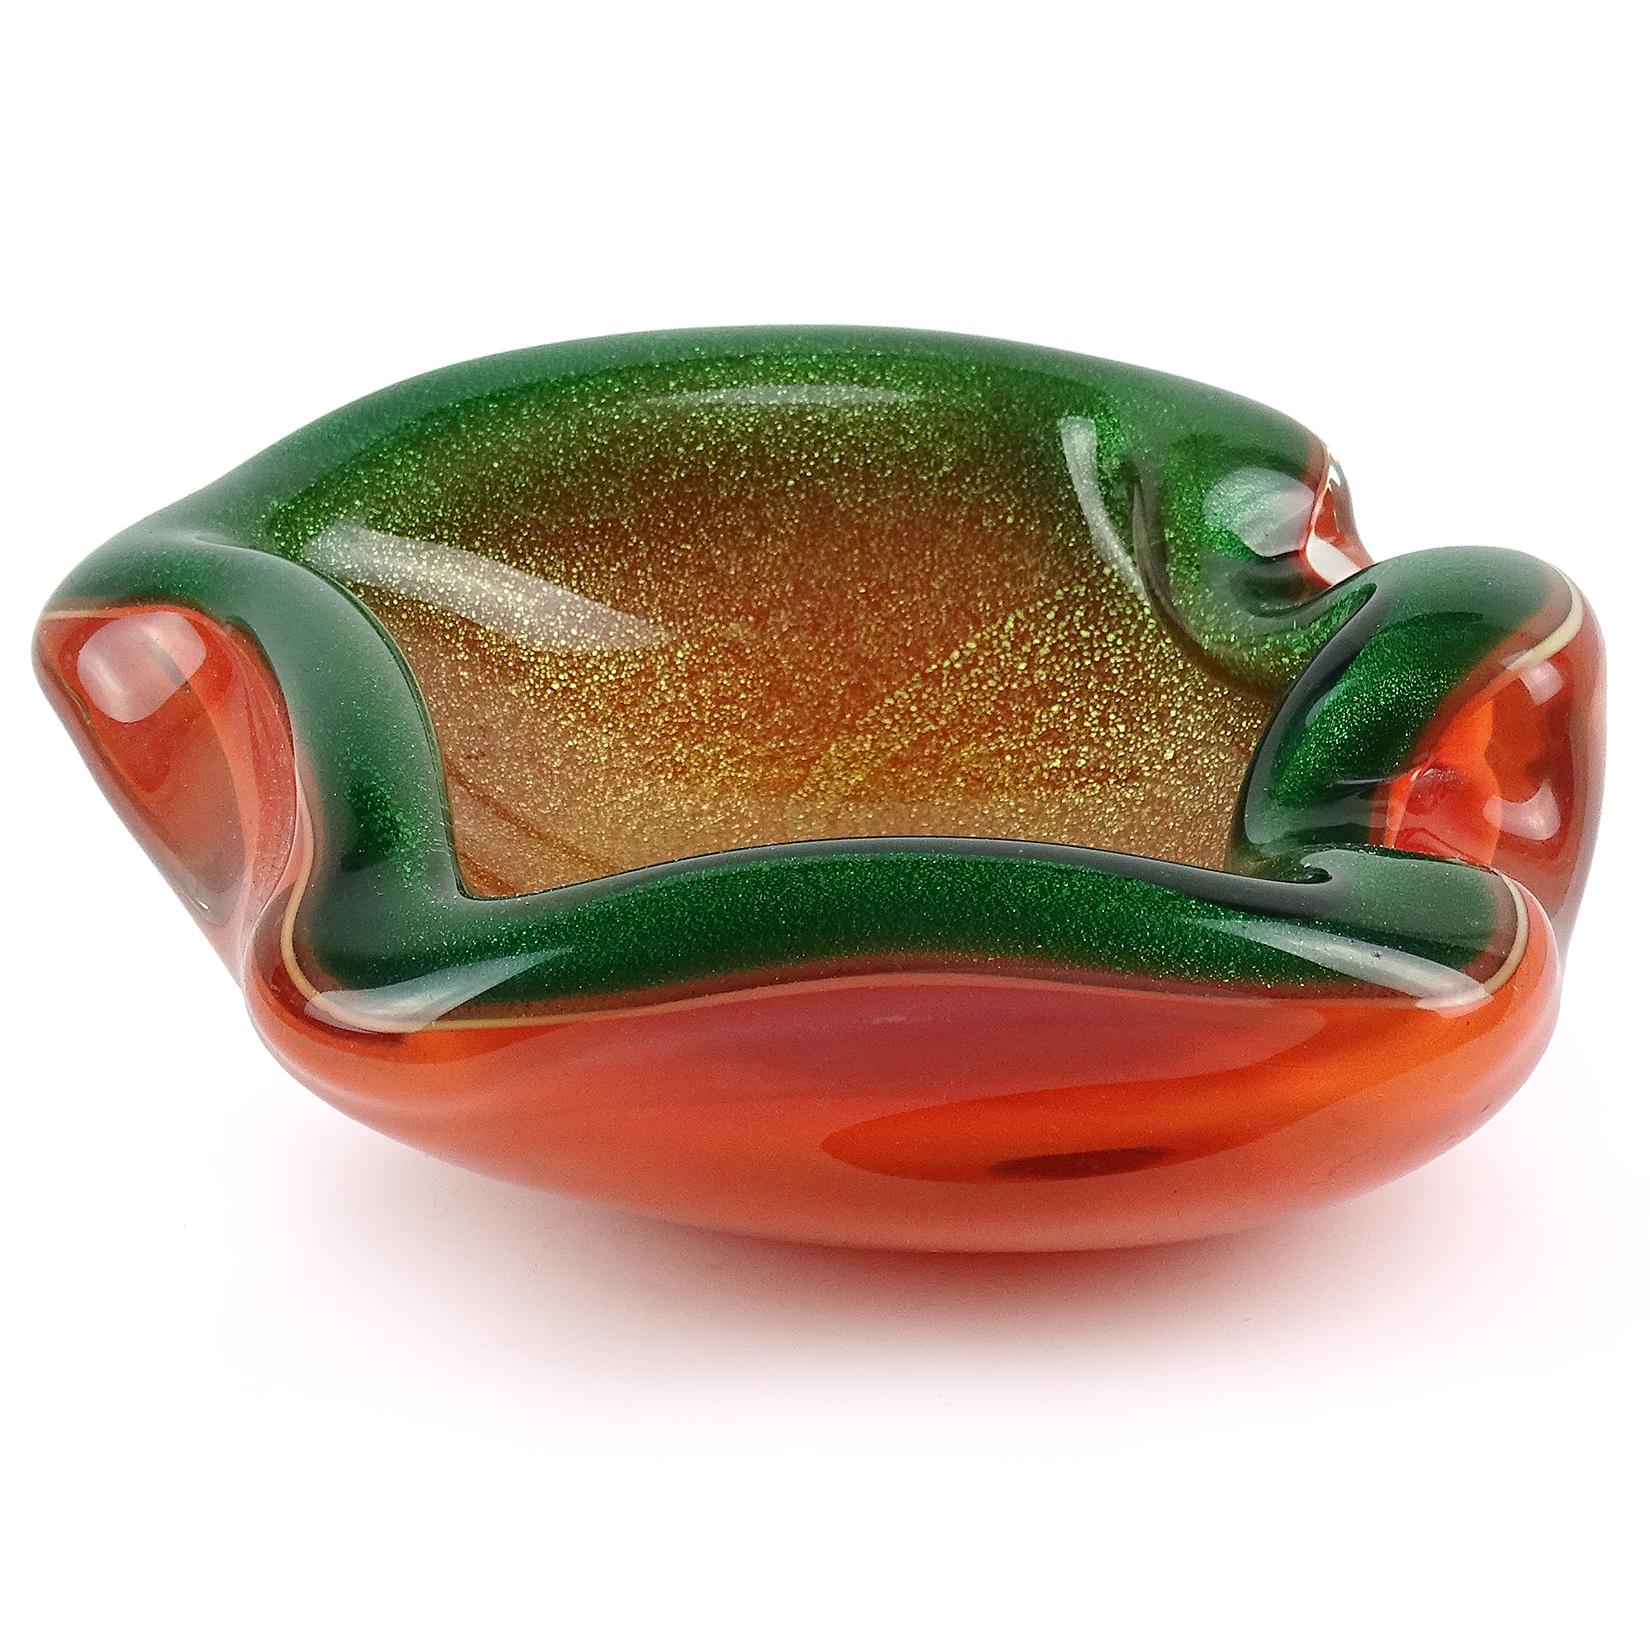 Beautiful vintage Murano handblown bright orange with green rim and gold flecks Italian art glass bowl. Created in the manner of designer Alfredo Barbini. Very unusual color combination, with Ombre style fade of color and biomorphic shape. Profusely